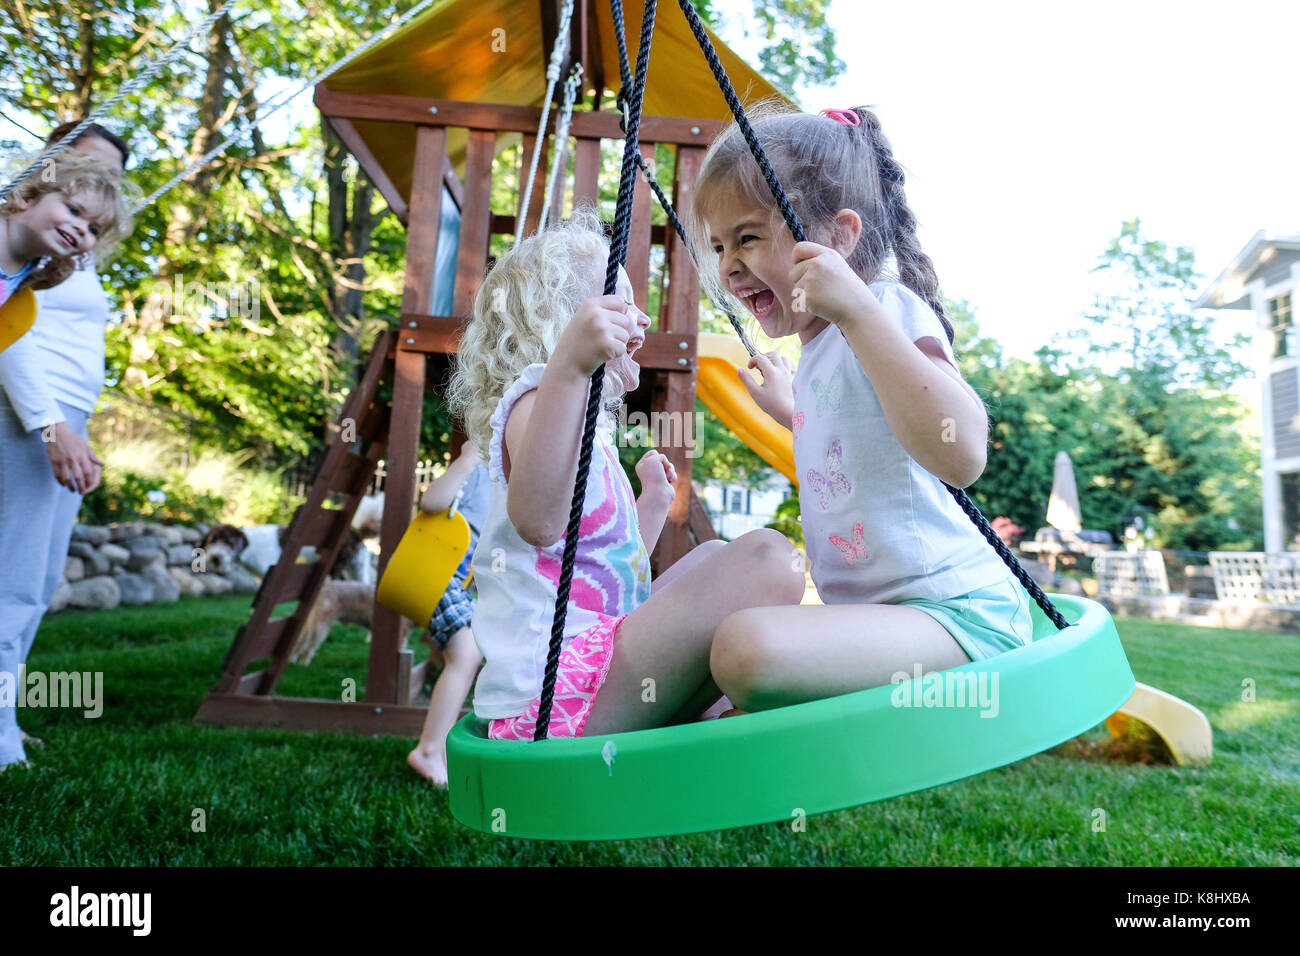 Friends playing on outdoor play equipment at playground Stock Photo